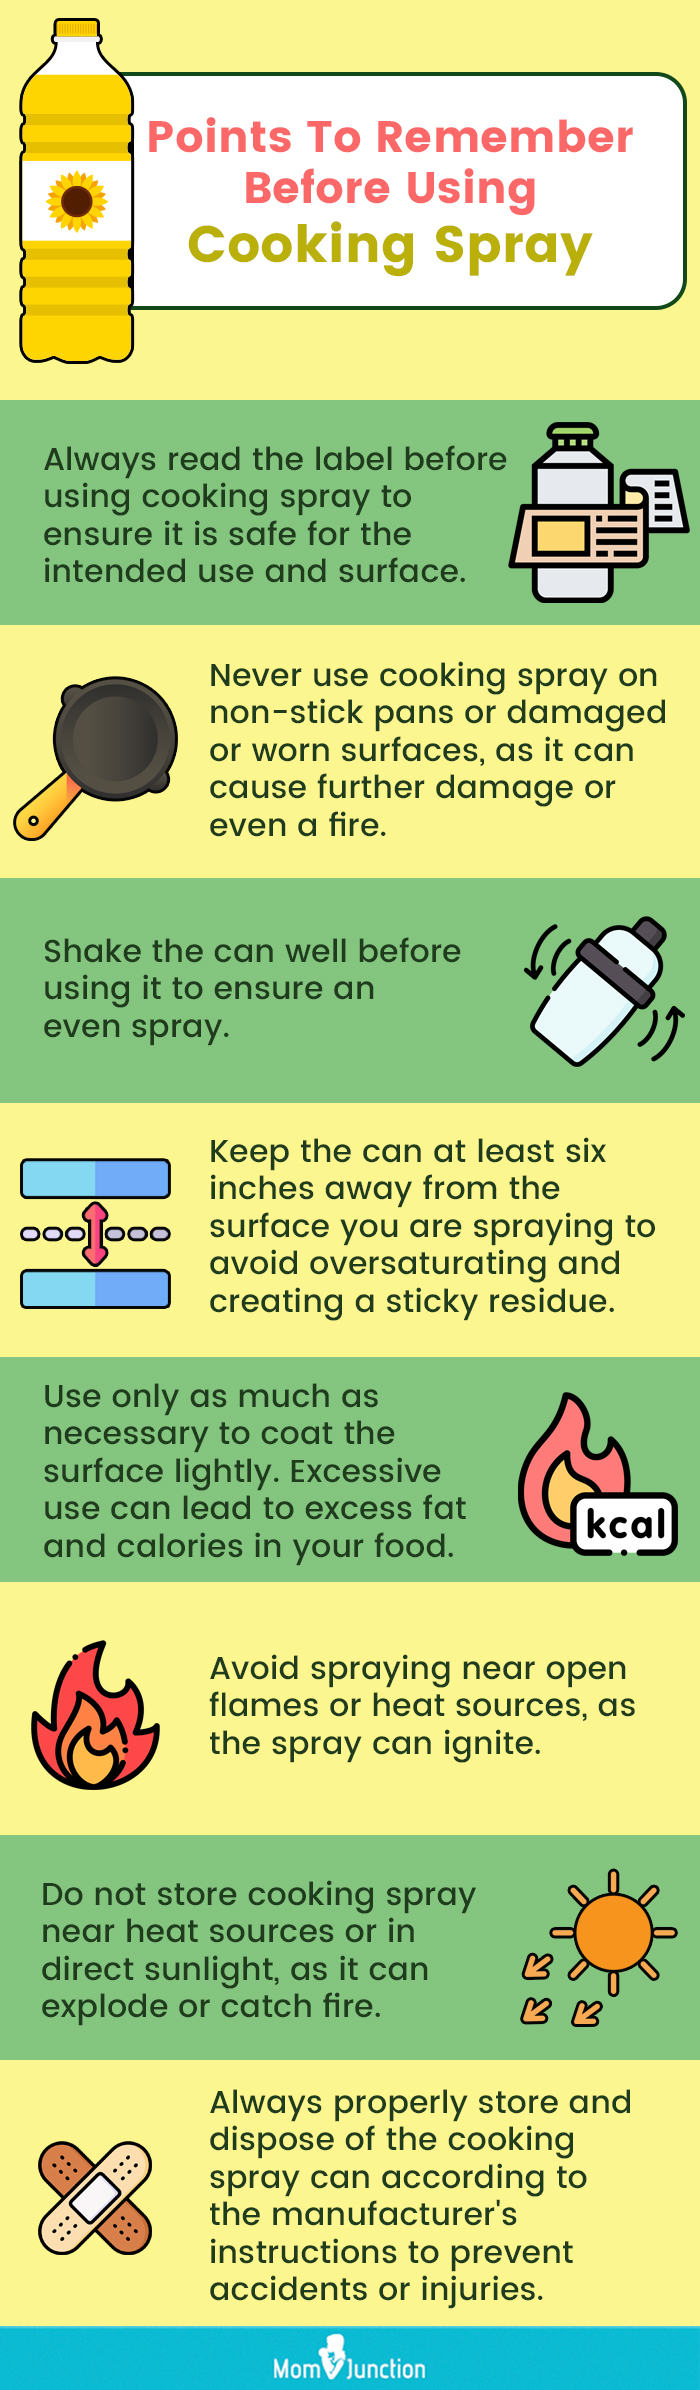 Points To Remember Before Using Cooking Spray (infographic)